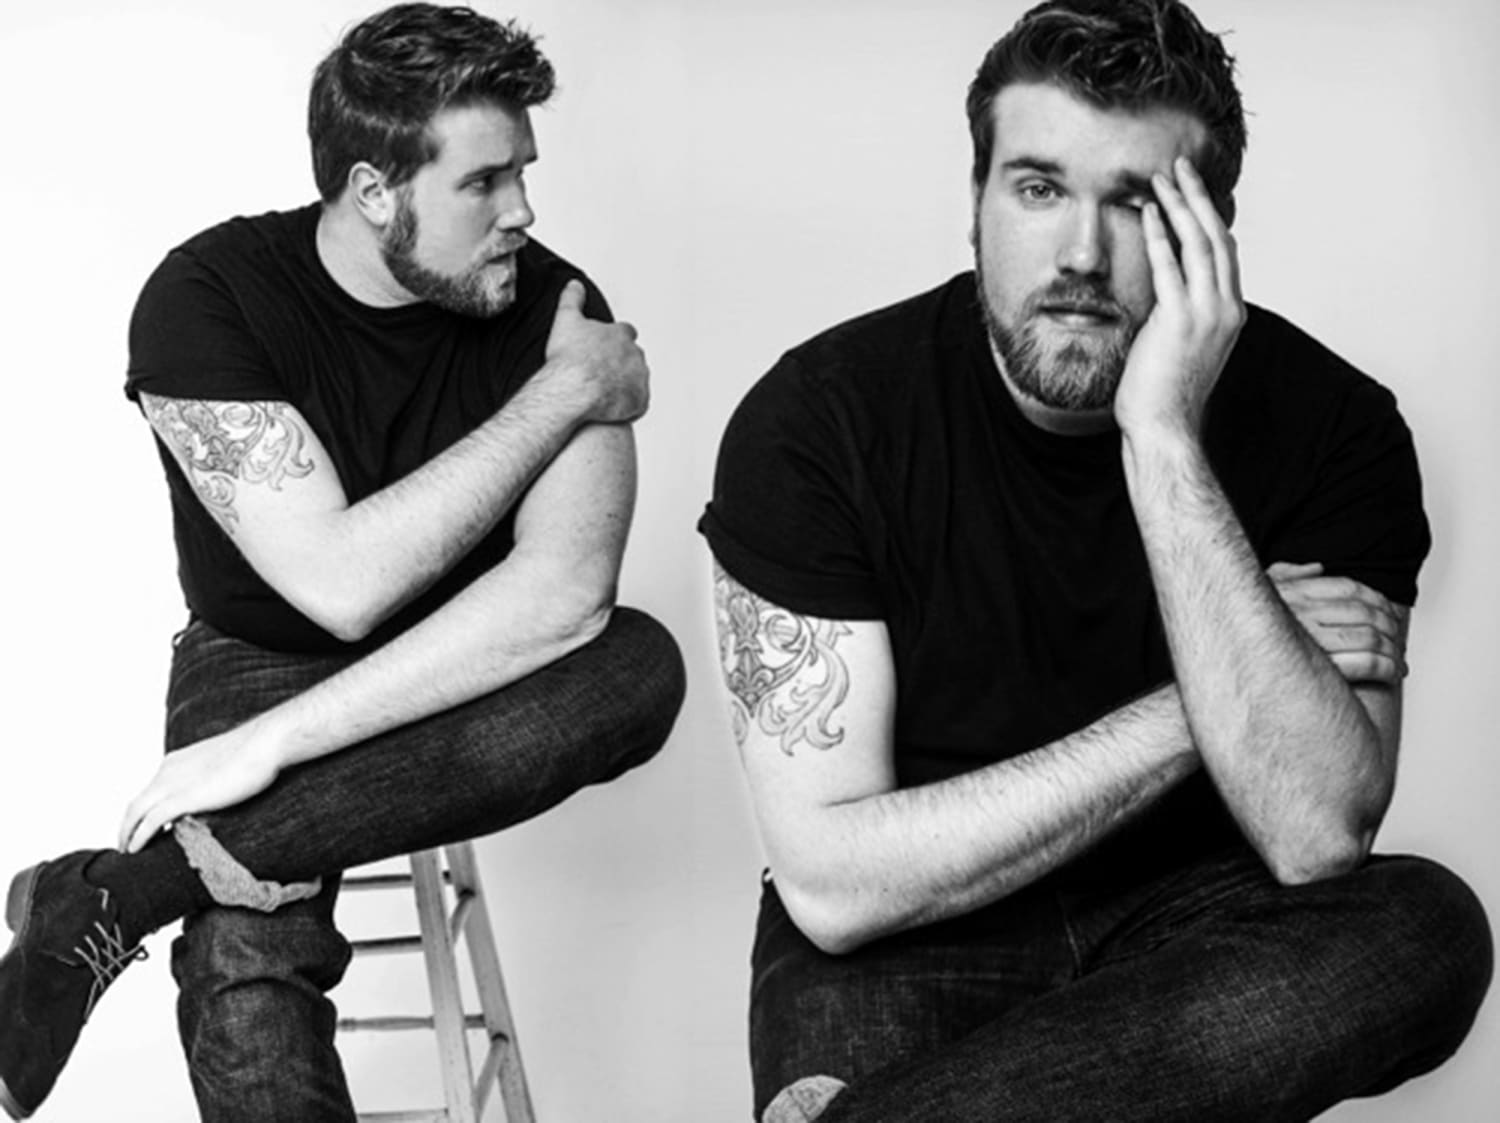 Brawn' IMG Models launches for plus-size men